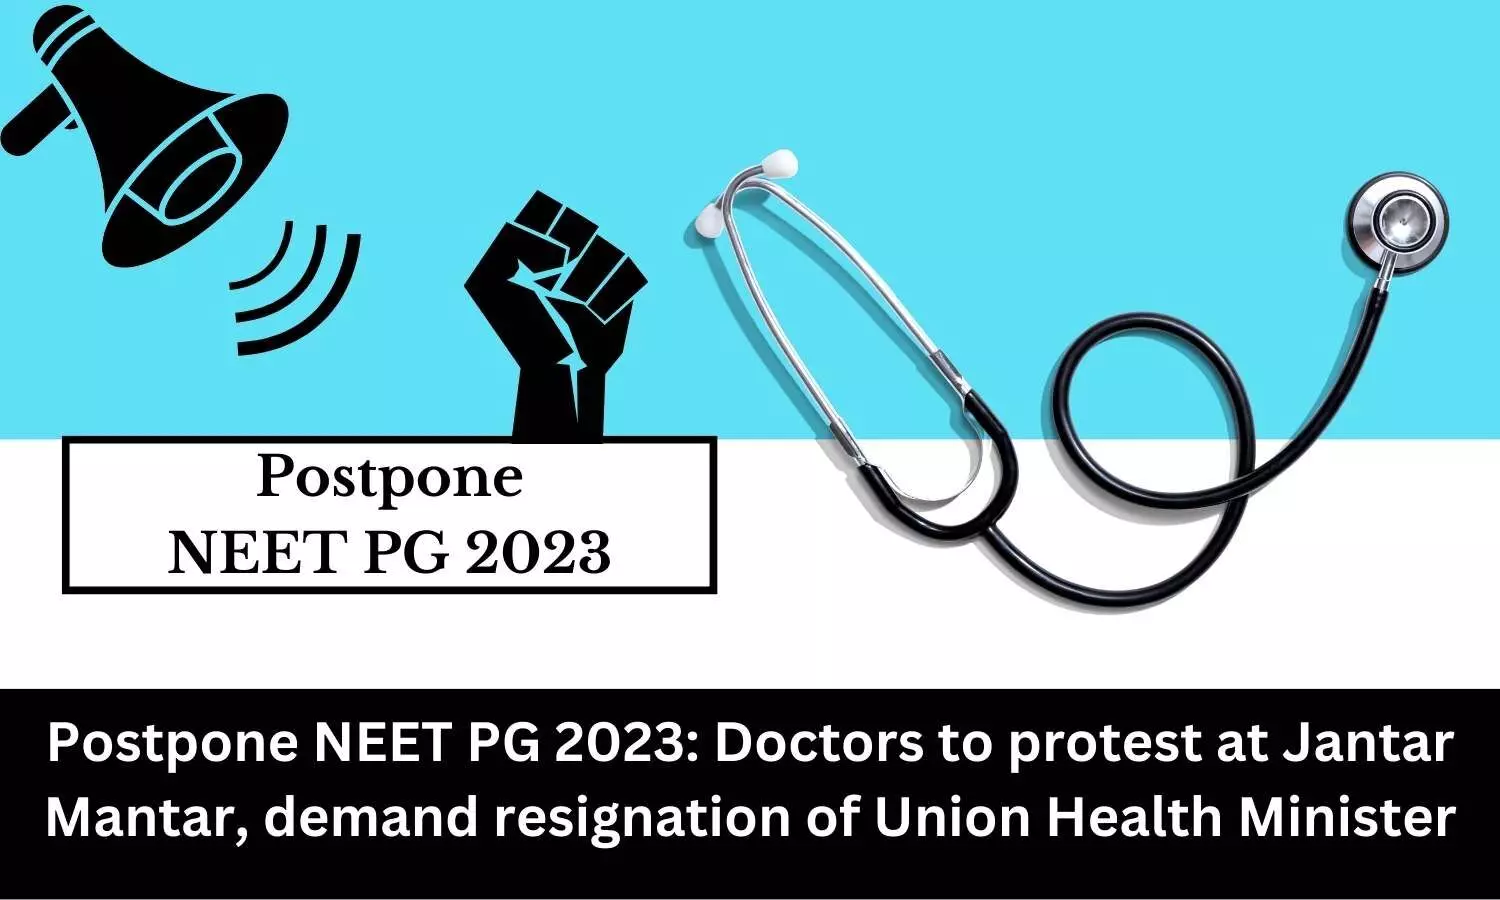 Doctors to stage protest at Jantar Mantar for postponing NEET PG 2023 exam